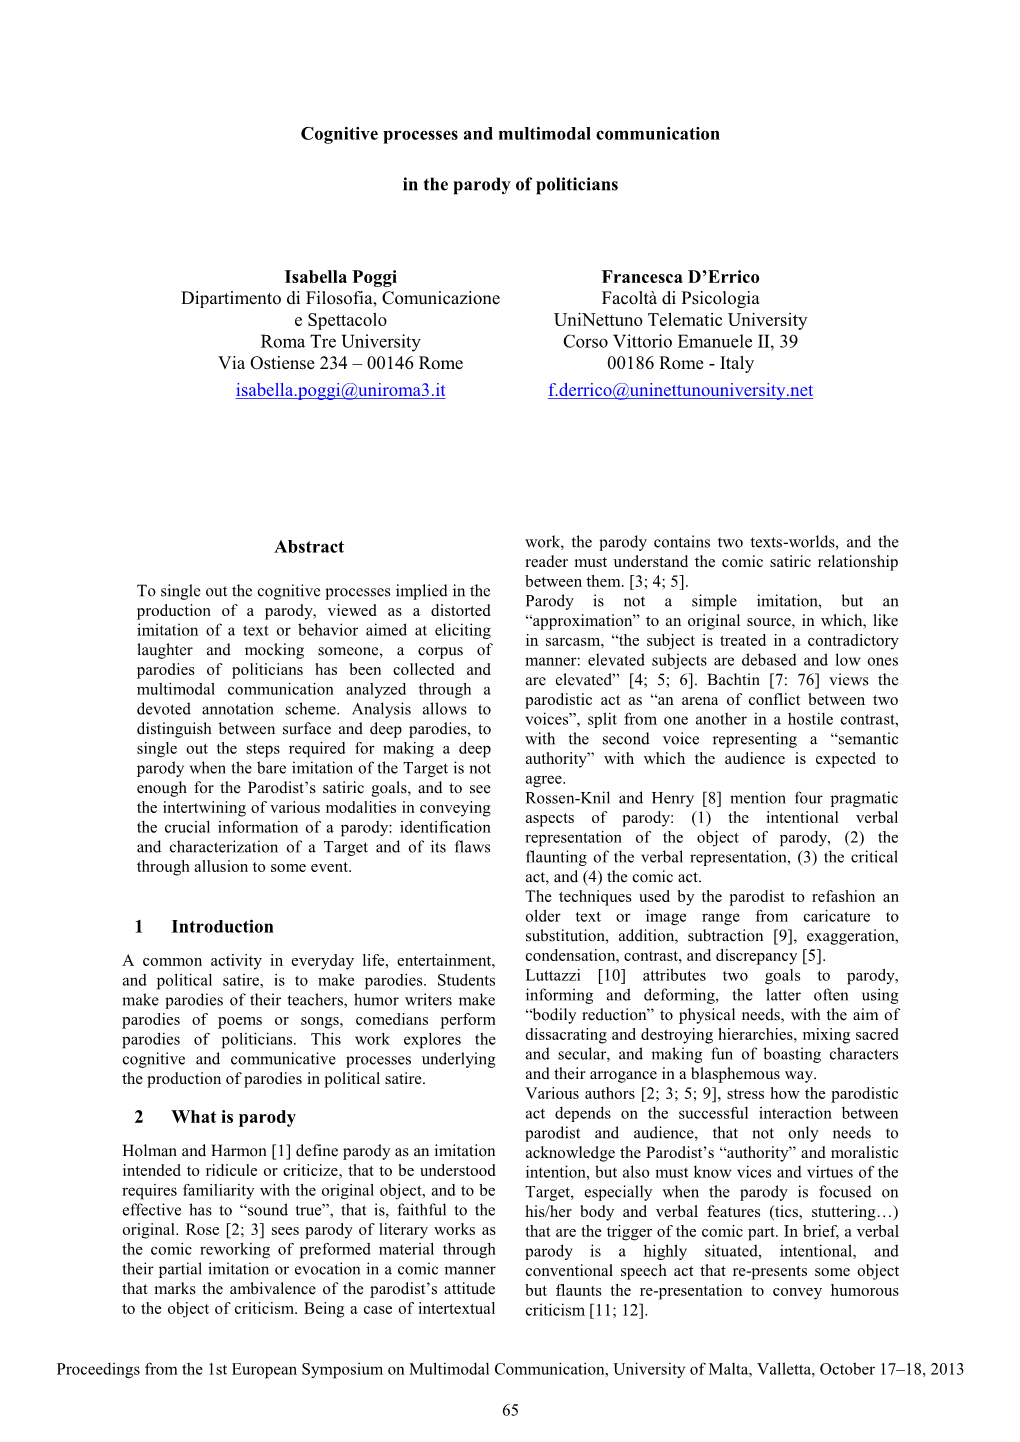 Cognitive Processes and Multimodal Communication in the Parody Of